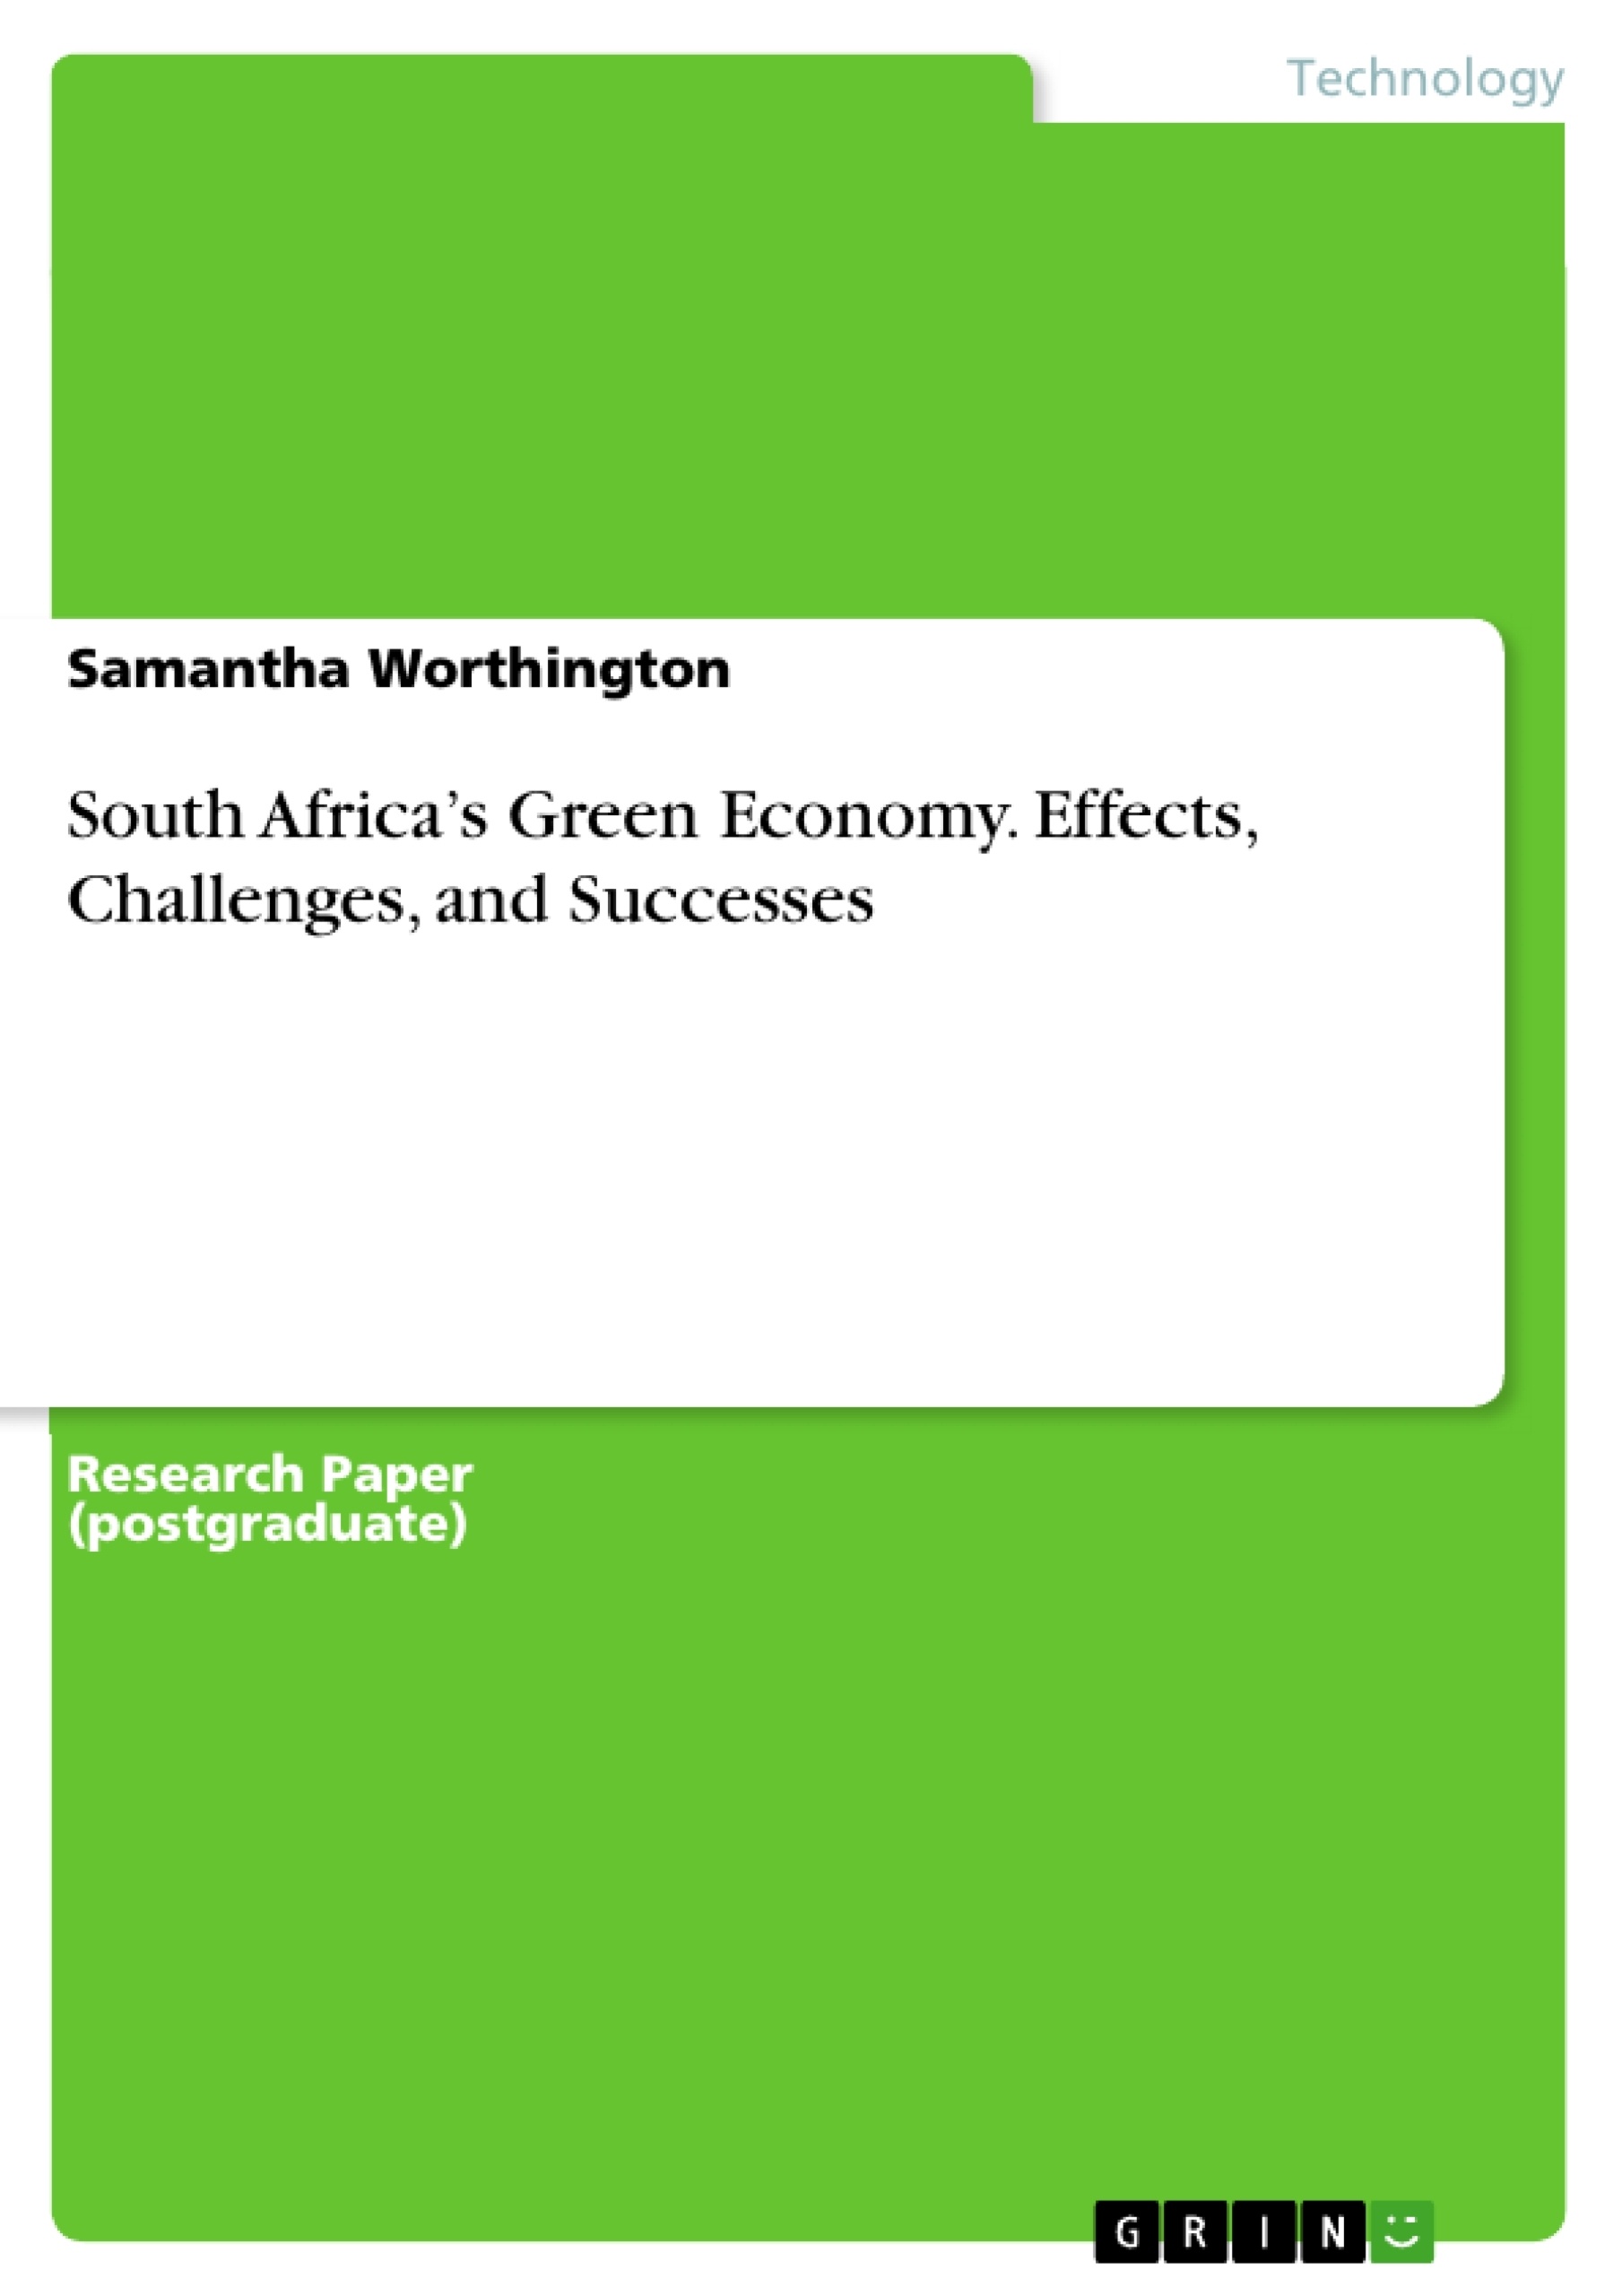 Title: South Africa’s Green Economy. Effects, Challenges, and Successes